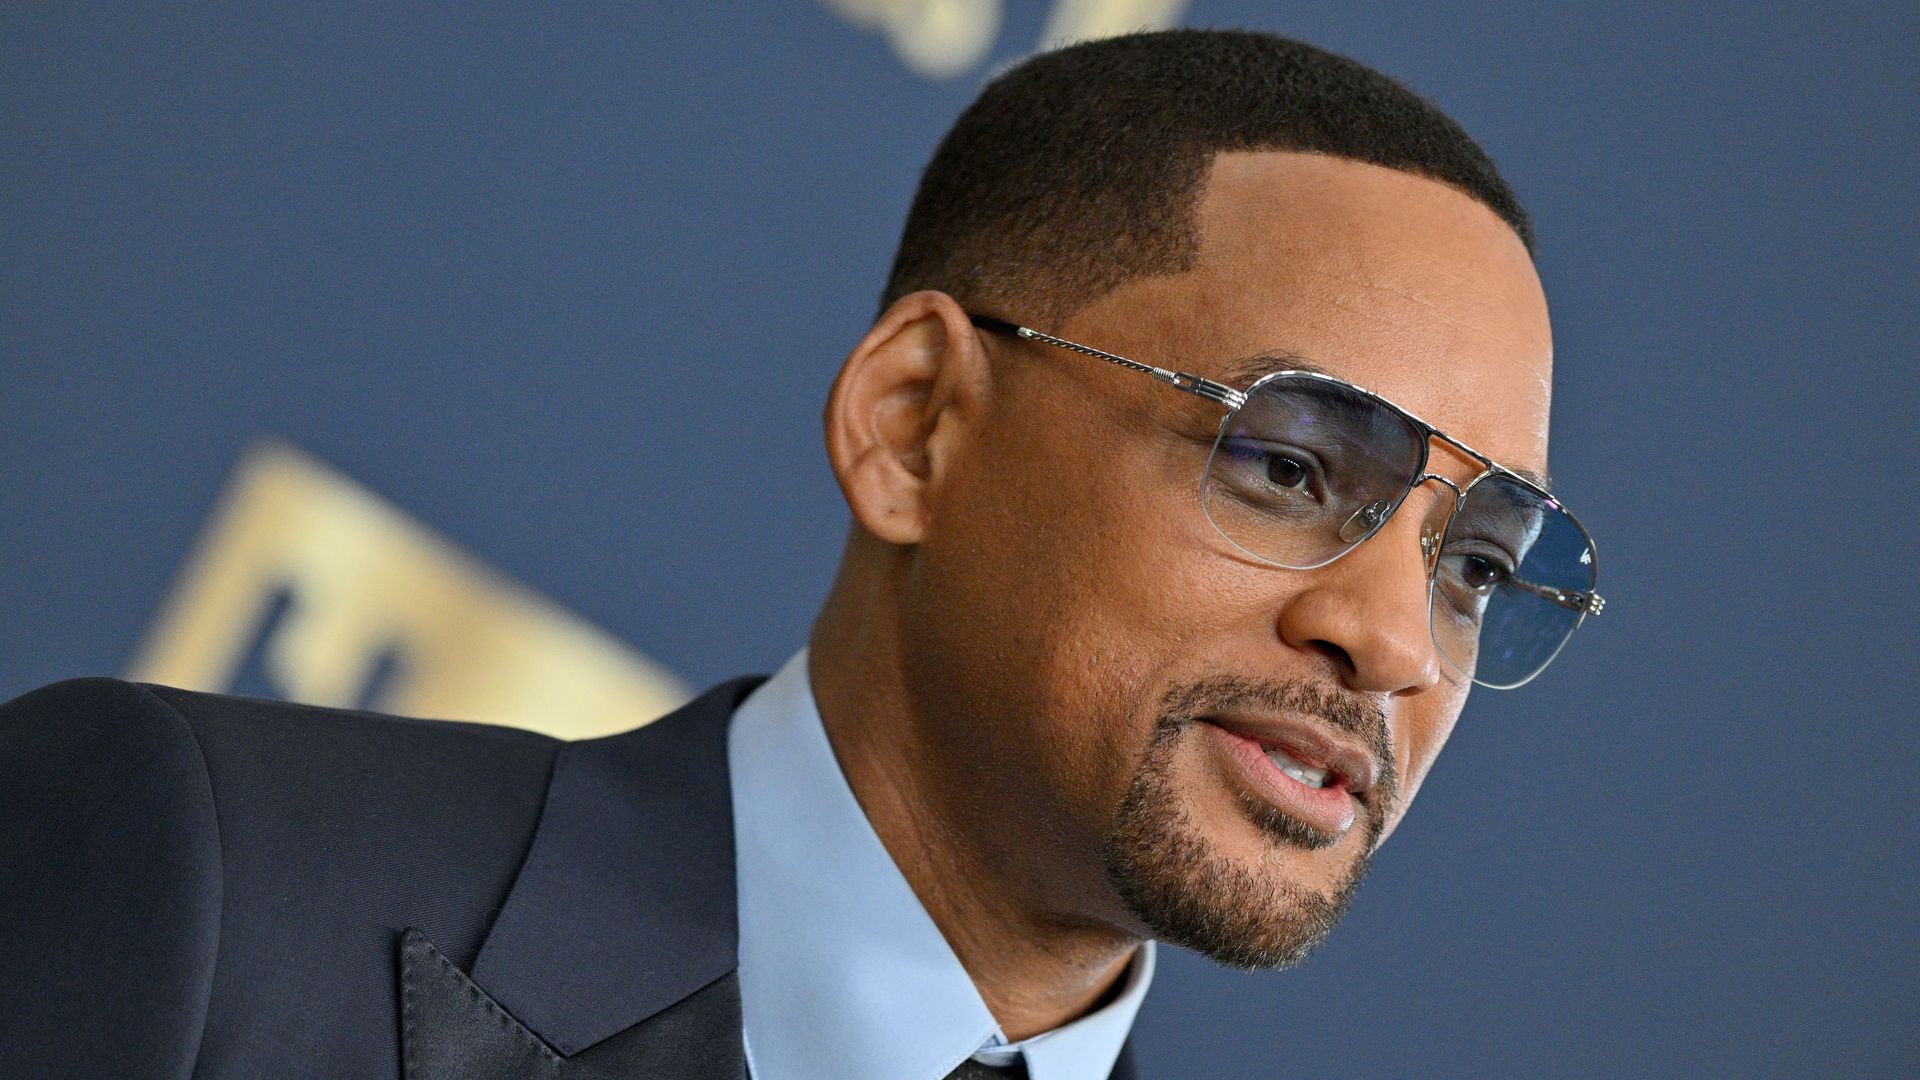 Photo of Will Smith wearing aviators and a suit